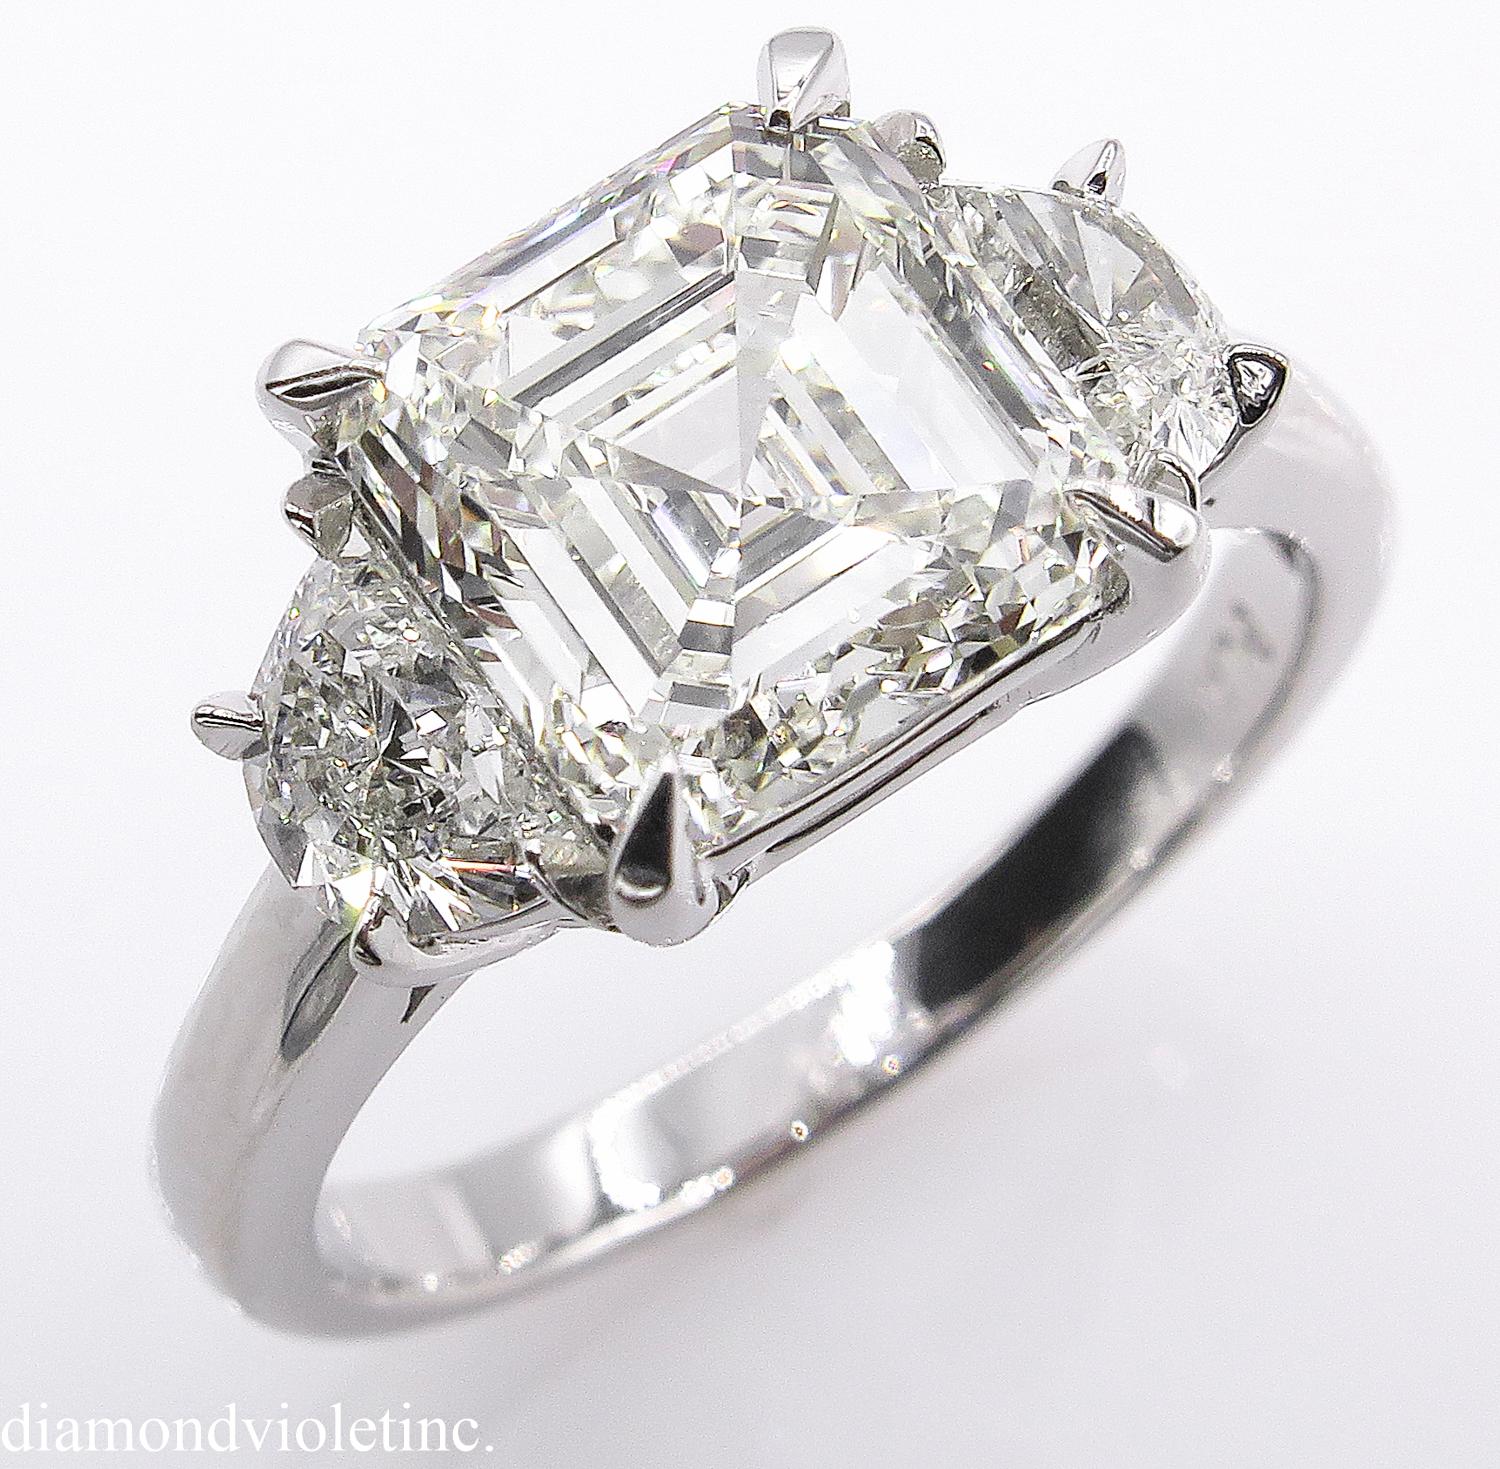 A Breathtaking Estate HANDMADE PLATINUM (stamped) Diamond Three-Stone Engagement ring dazzles GIA Certified 3.00ct Asscher cut Center Diamond in K color and VVS1 clarity (Very Bright, Near-Flawless) with measurements of 8.09x7.86x5.13mm.
It is set